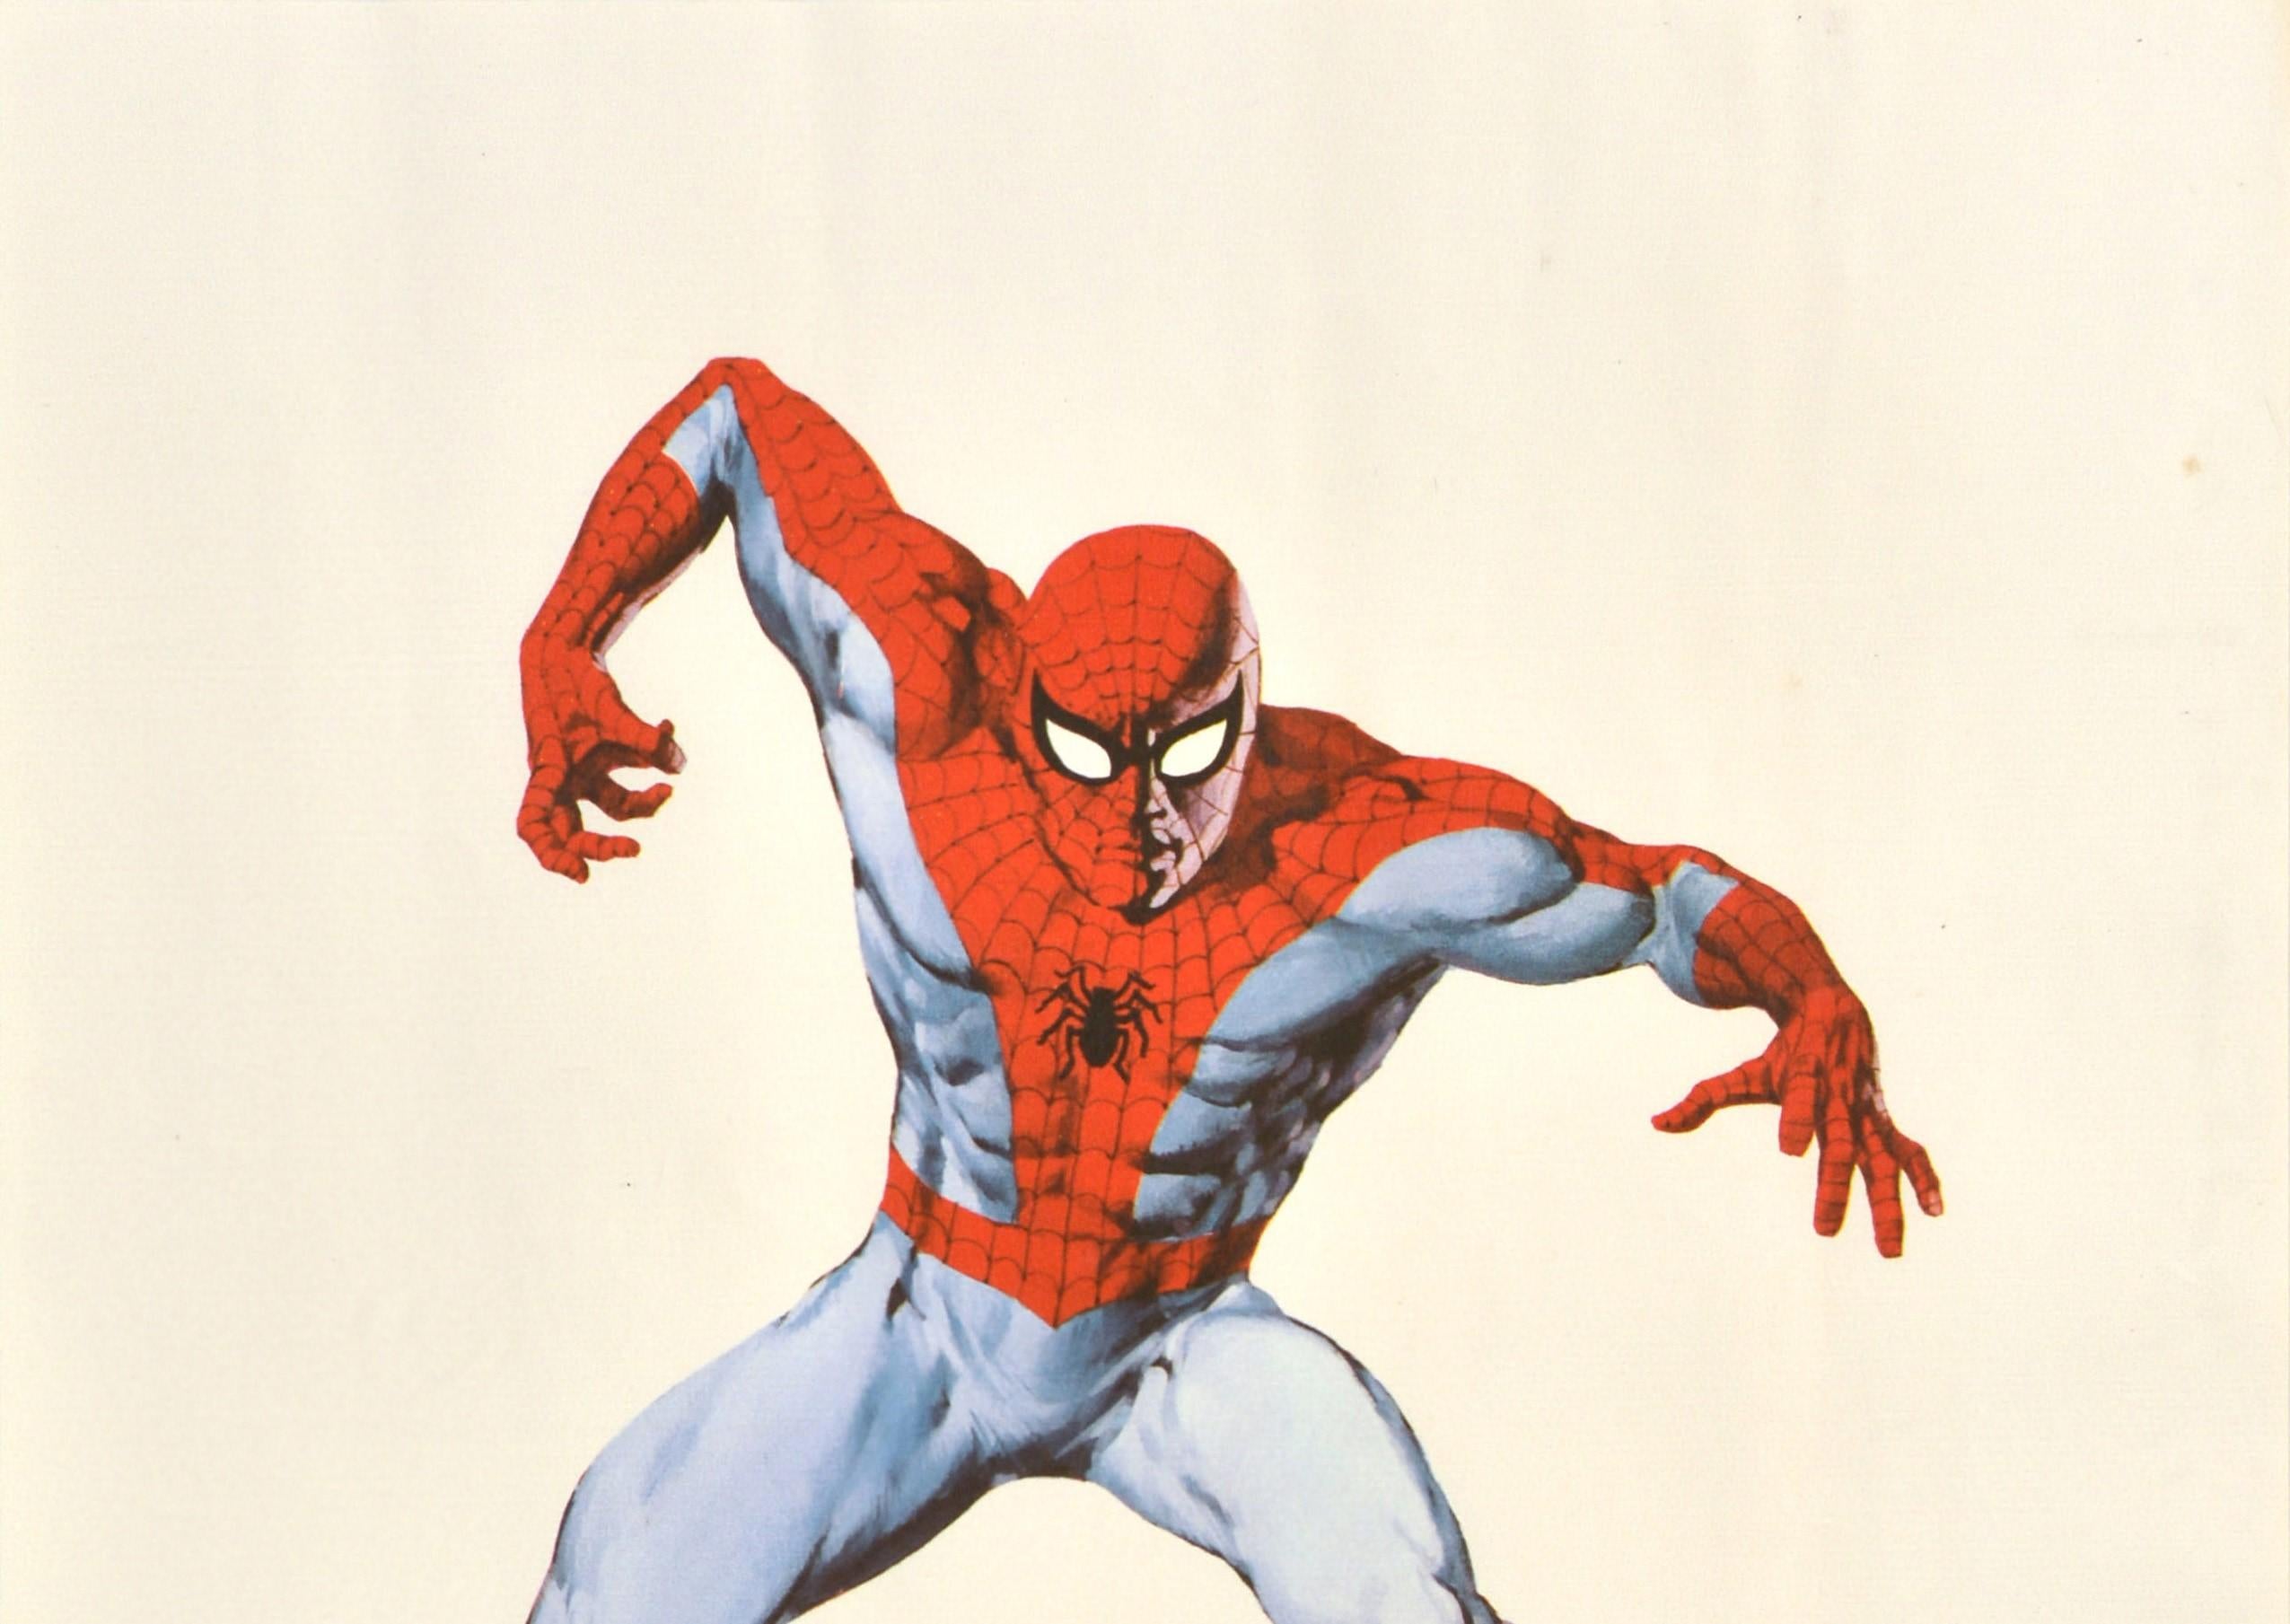 Original vintage animated action adventure movie poster featuring the Marvel Comics superhero Spiderman looking forward in his spiderweb costume, the title in bold yellow text below. Created by Stan Lee and cartoon artist Steve Ditko, the character